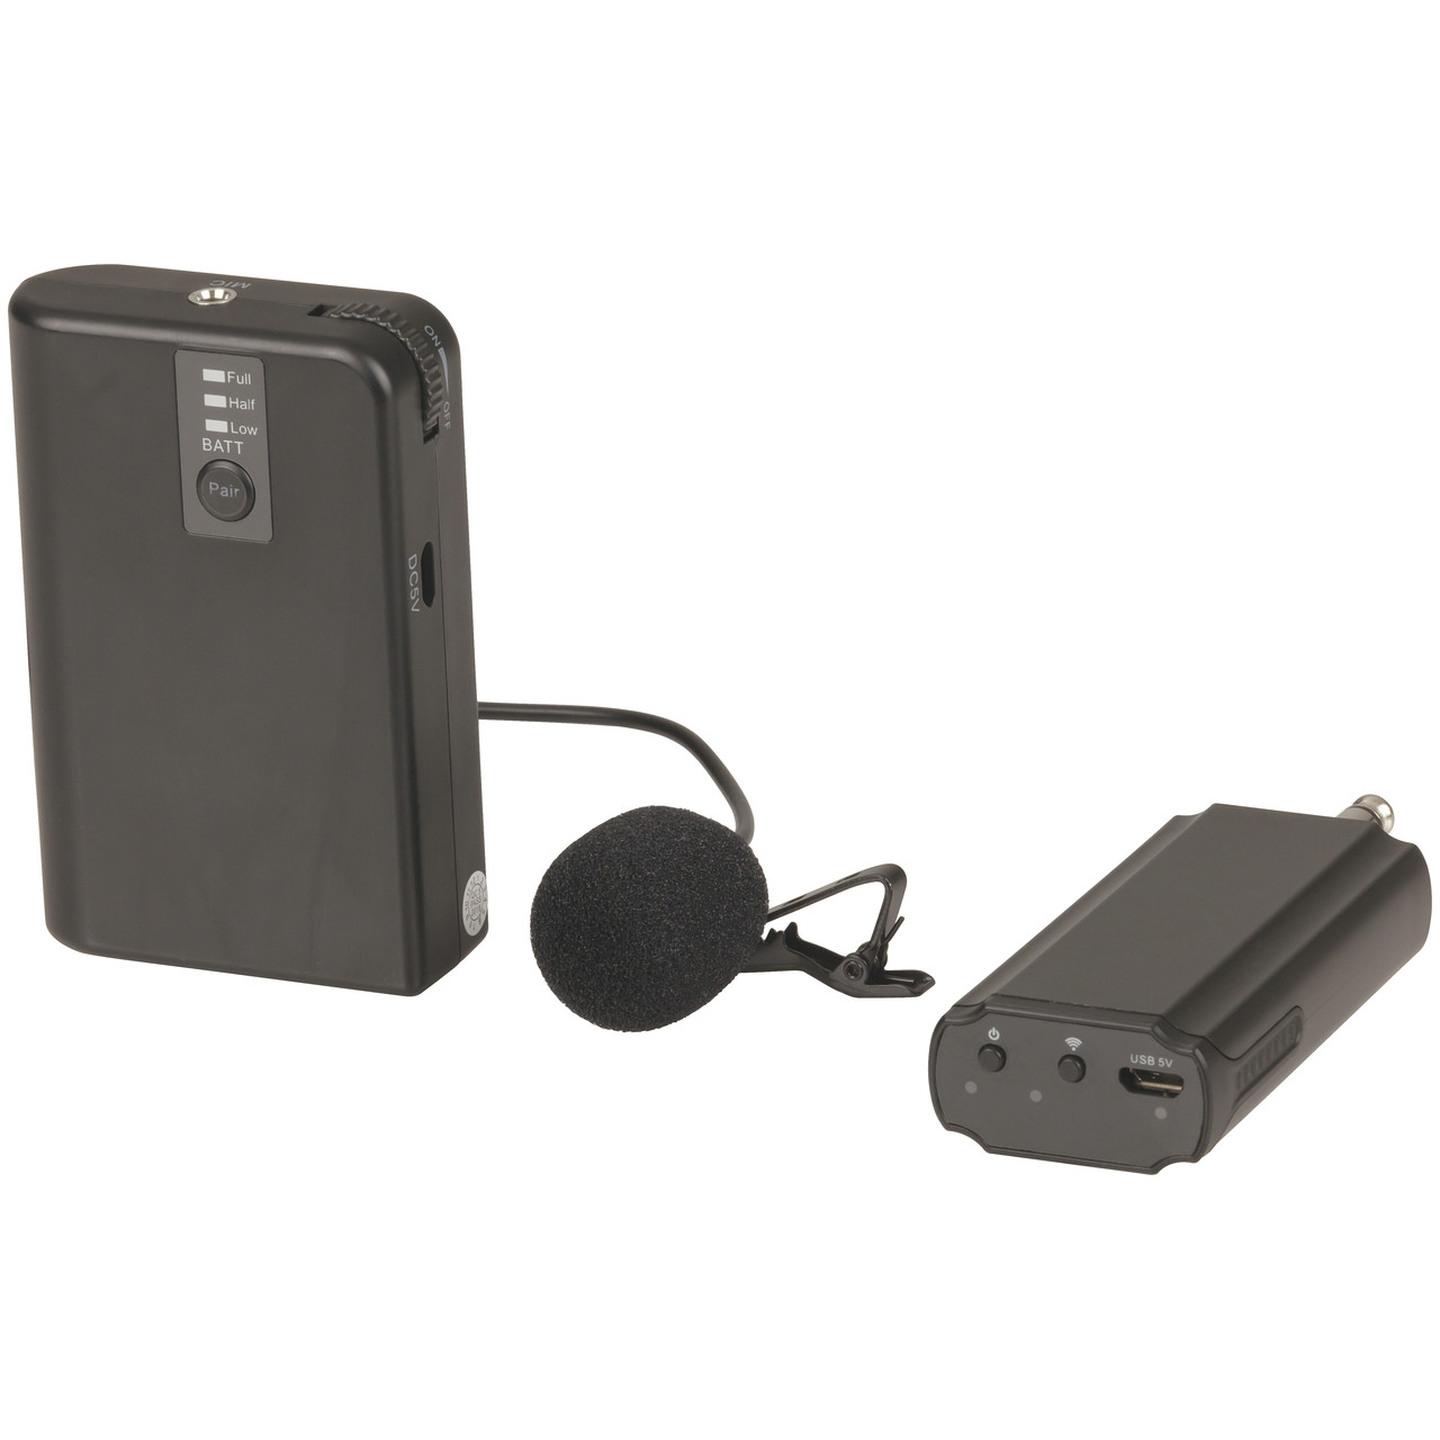 Digitech Wireless UHF Lapel Microphone and Receiver